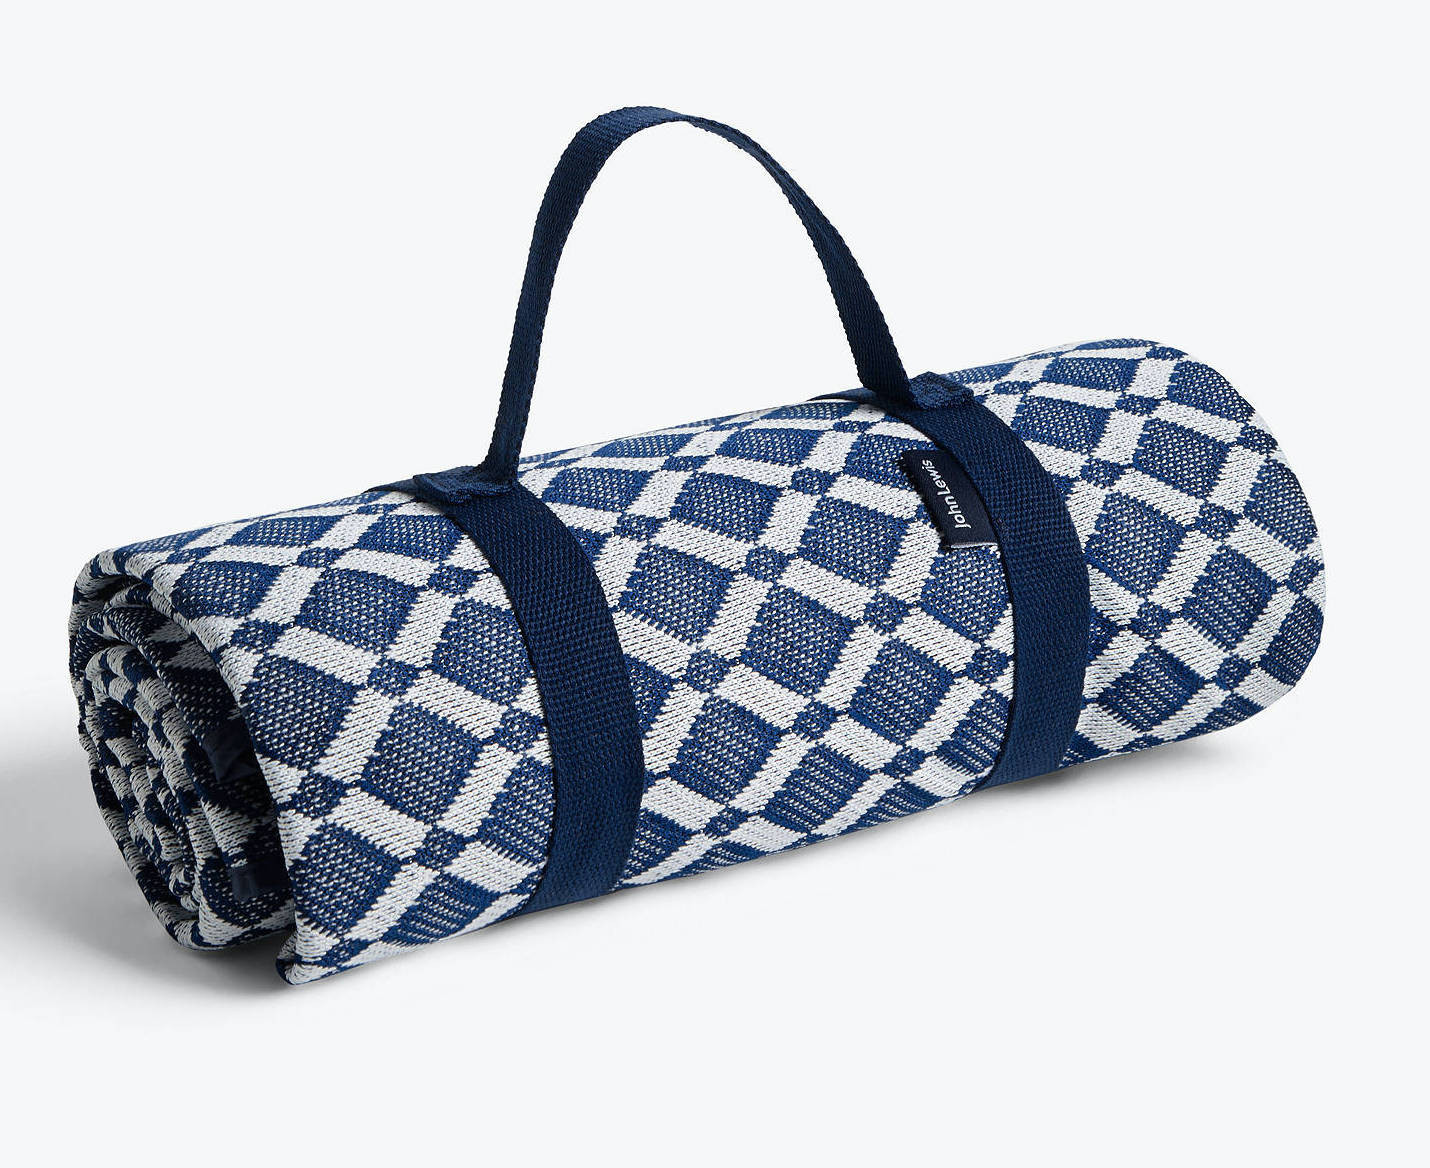 A John Lewis picnic blanket will add a bit of style to your outdoor dining set-up